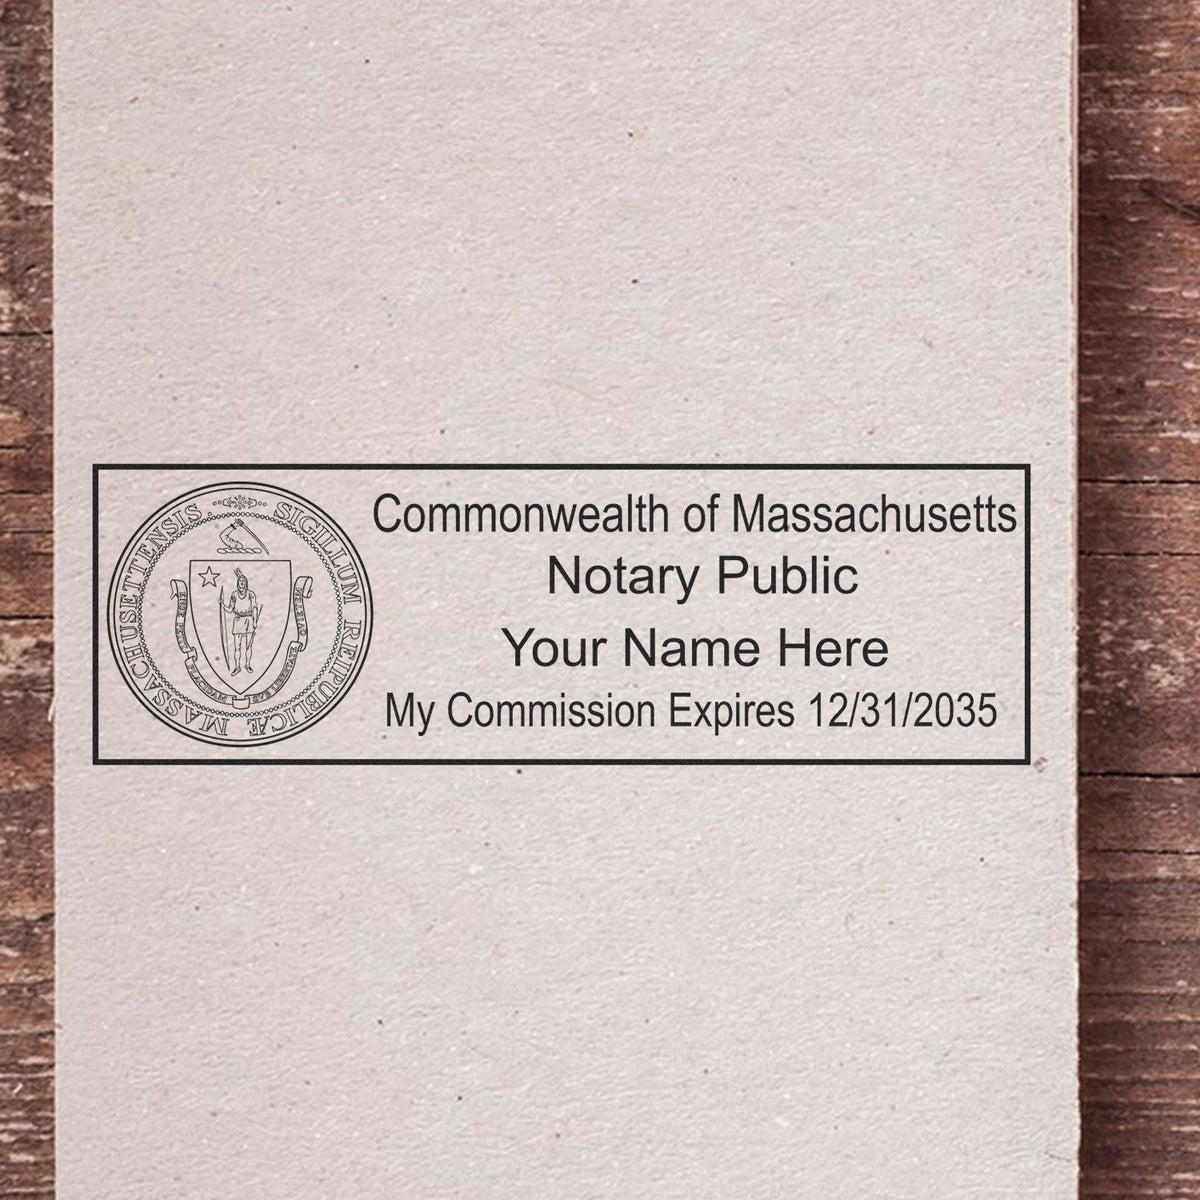 This paper is stamped with a sample imprint of the Slim Pre-Inked State Seal Notary Stamp for Massachusetts, signifying its quality and reliability.